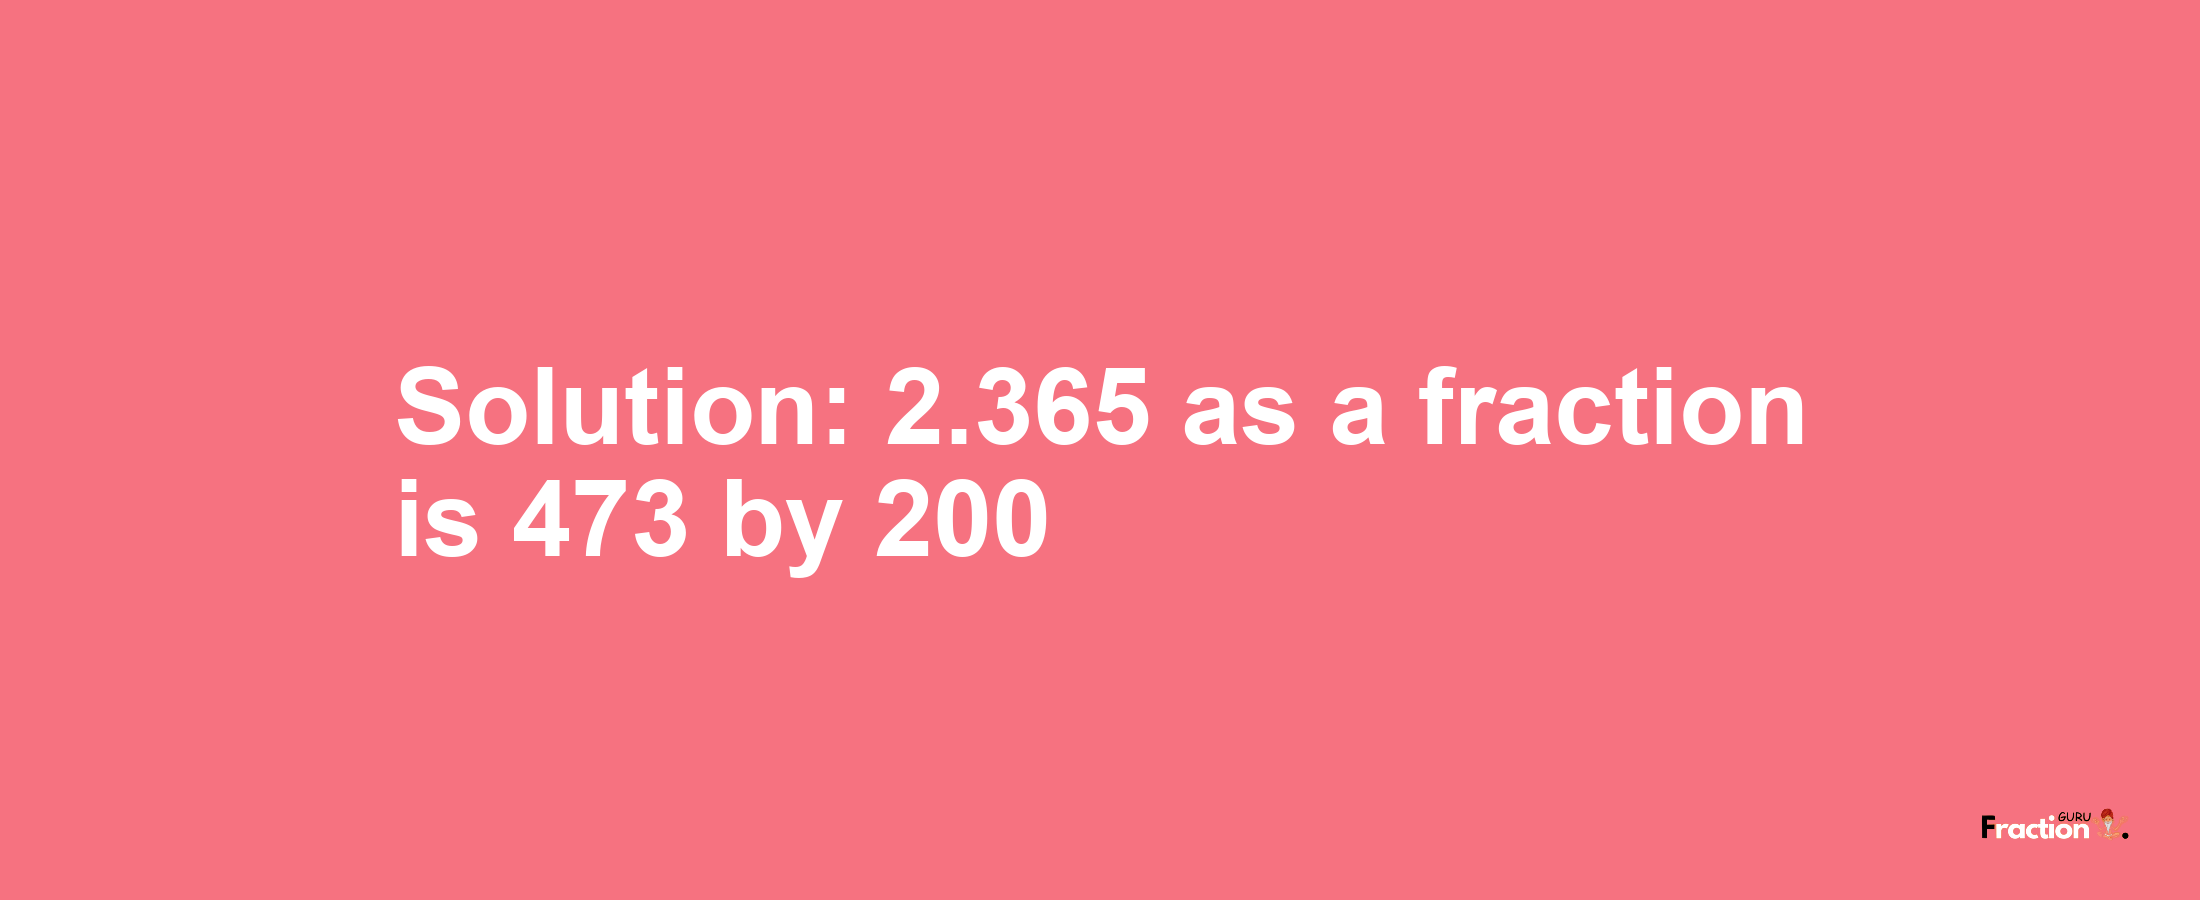 Solution:2.365 as a fraction is 473/200